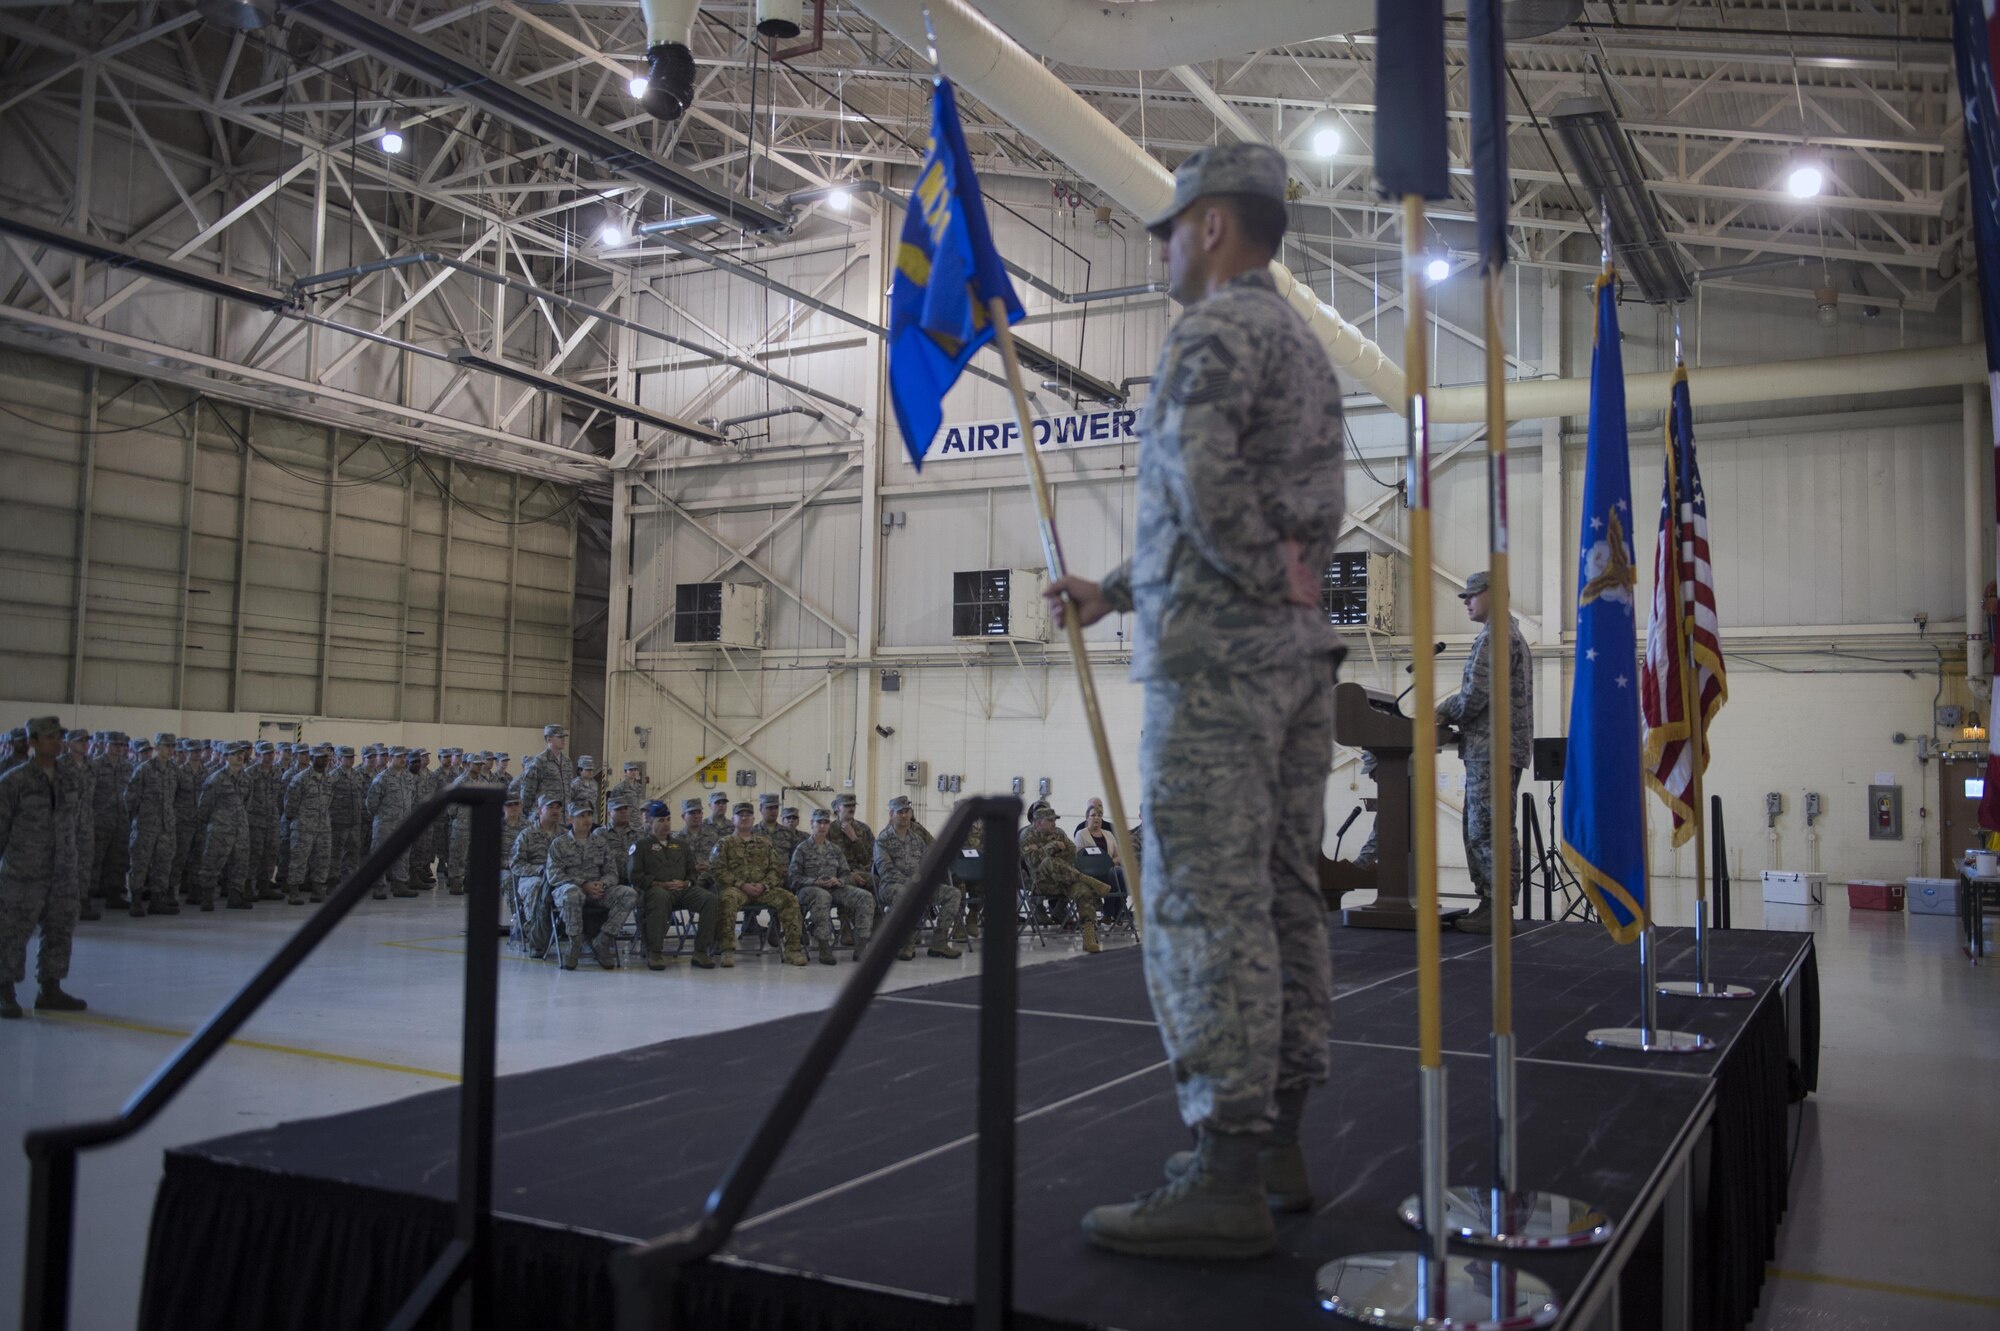 Lt. Col. Neal Van Houten, 23d Maintenance Squadron commander, commends 23d MXS Airmen for their maintenance professionalism and expertise during a re-designation ceremony, Nov. 9, 2017, at Moody Air Force Base, Ga. Van Houten took command of Air Combat Command’s second largest squadron, leading the 800 men and women who are responsible for executing safe and reliable maintenance on aircraft systems, ground equipment and munitions to support the 23d Wing's attack and rescue missions. (U.S. Air Force photo by Senior Airman Greg Nash)